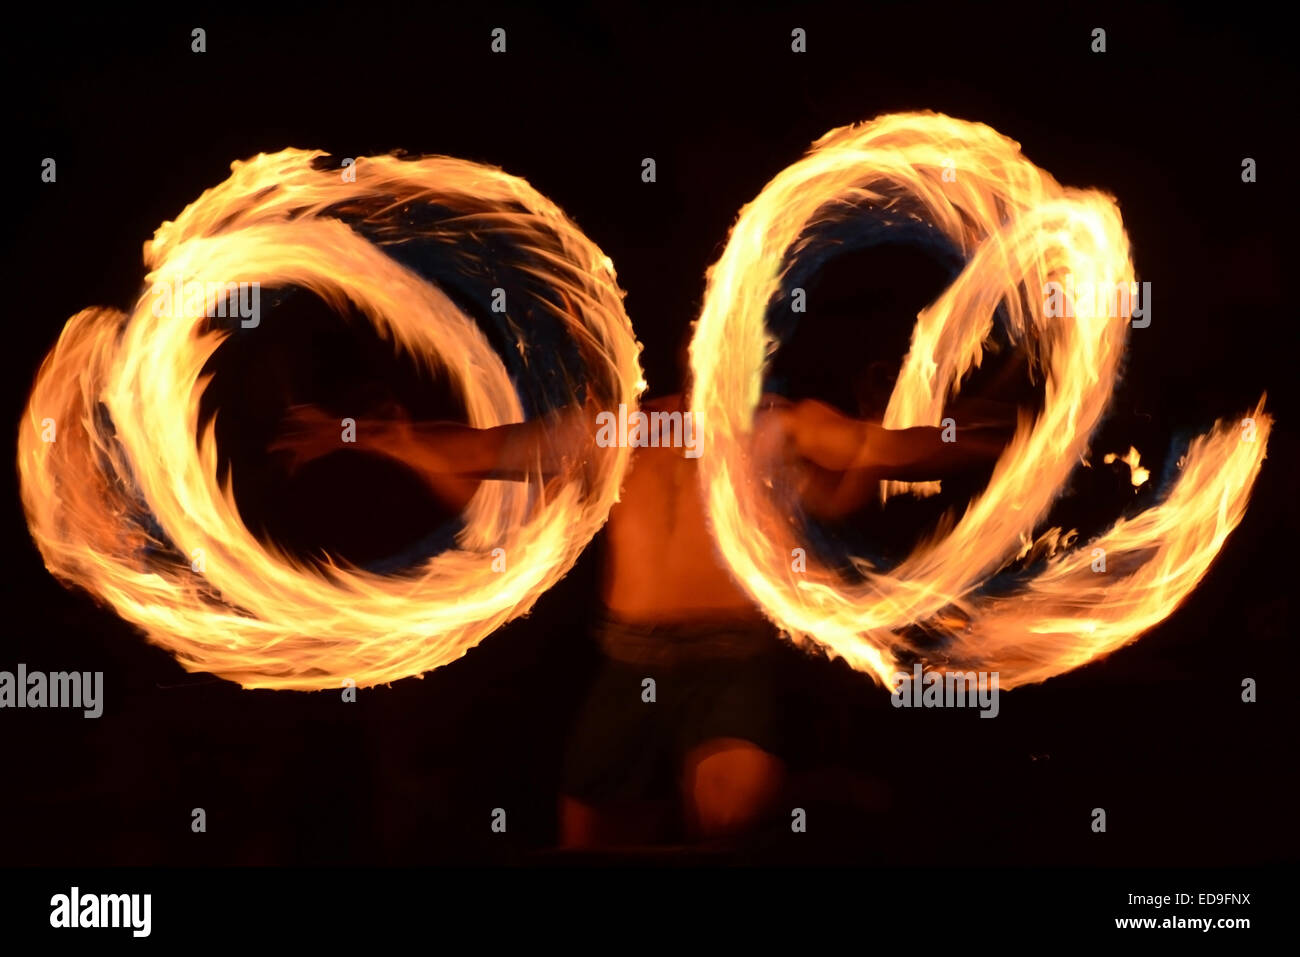 Traditional Samoan fire dancer practicing ancient ritual Stock Photo